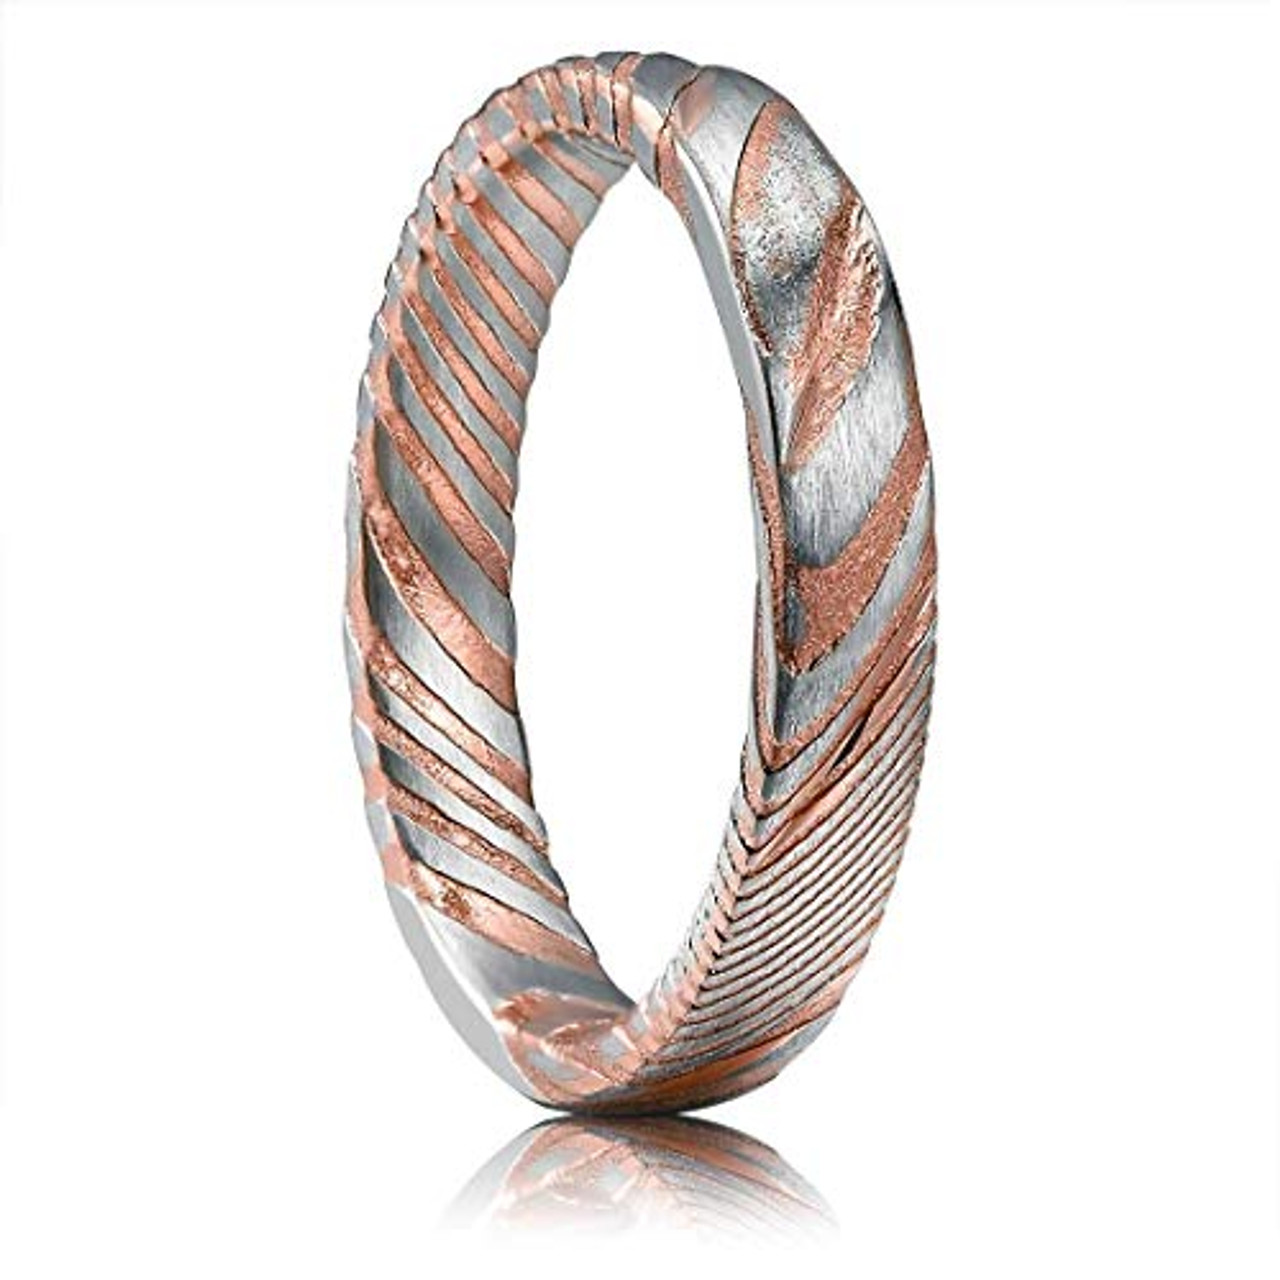 (4mm)  Women's Damascus Steel Ring Wedding ring band. Rose Gold and Silver Tone Grooved with Domed Top and Light Weight.